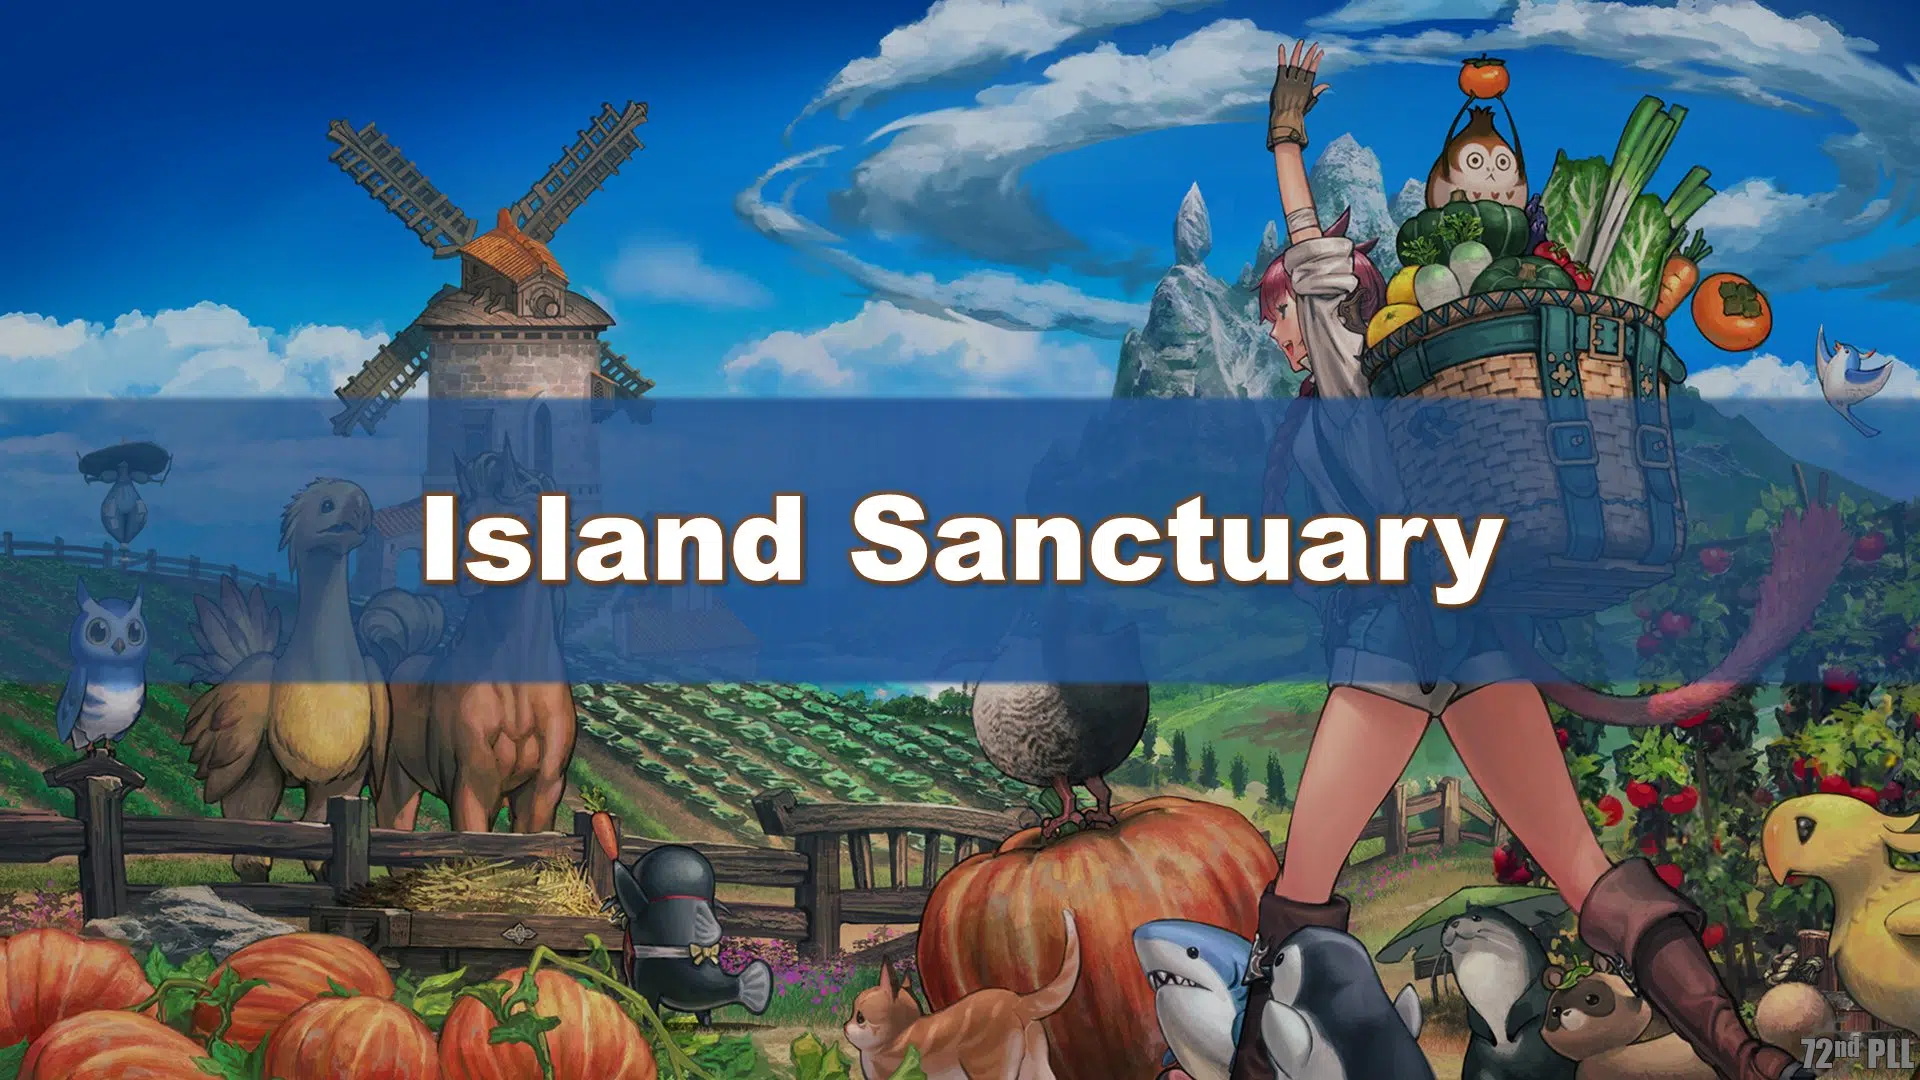 Final Fantasy 14: How to Unlock And Access Island Sanctuary?